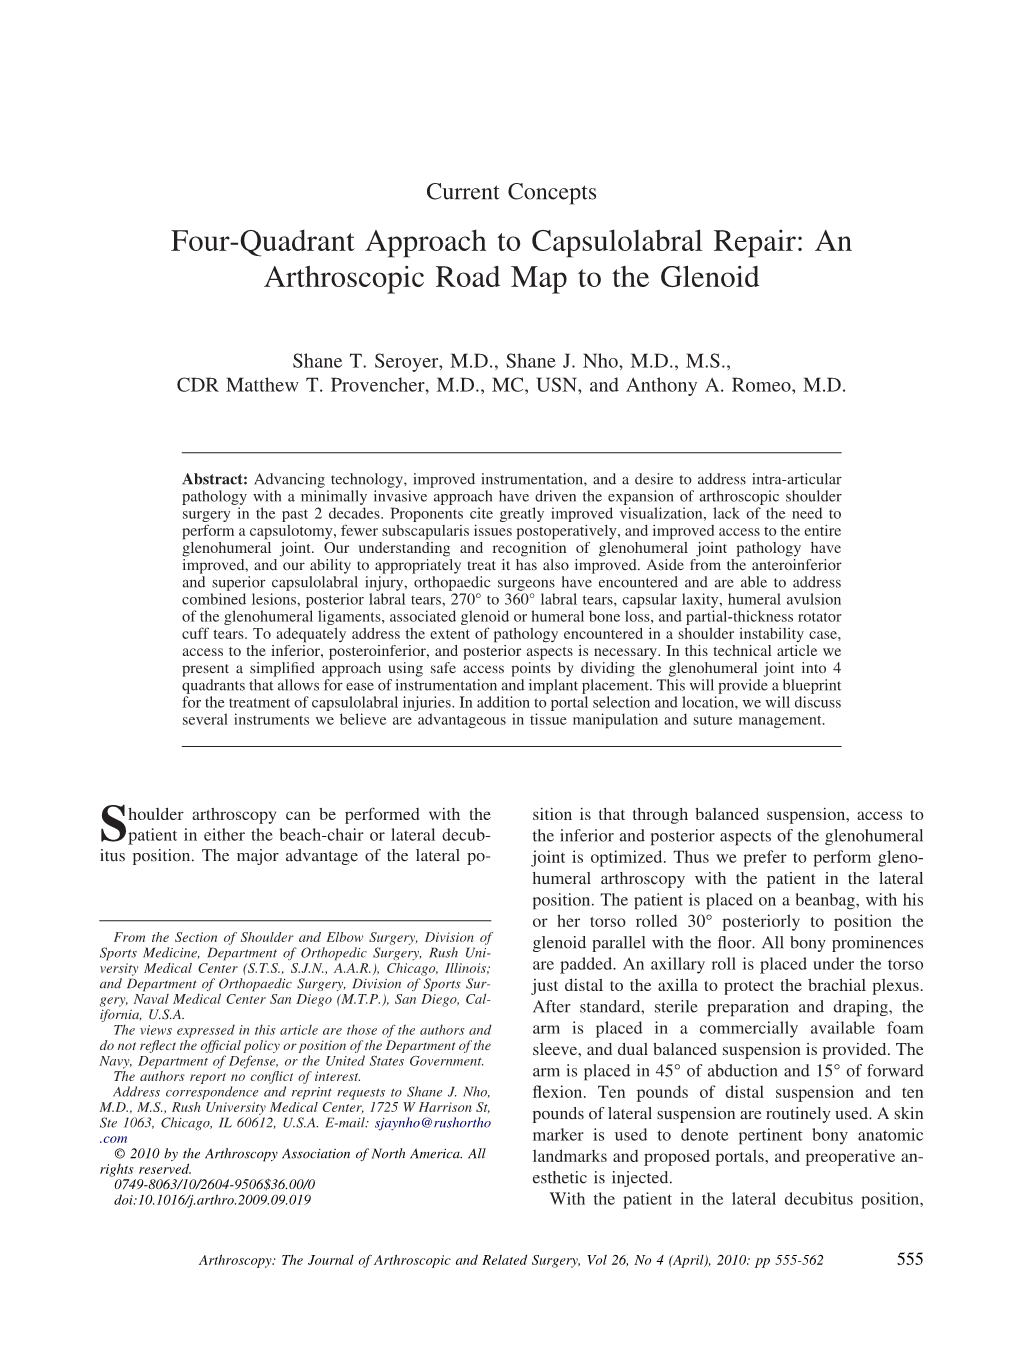 Four-Quadrant Approach to Capsulolabral Repair: an Arthroscopic Road Map to the Glenoid